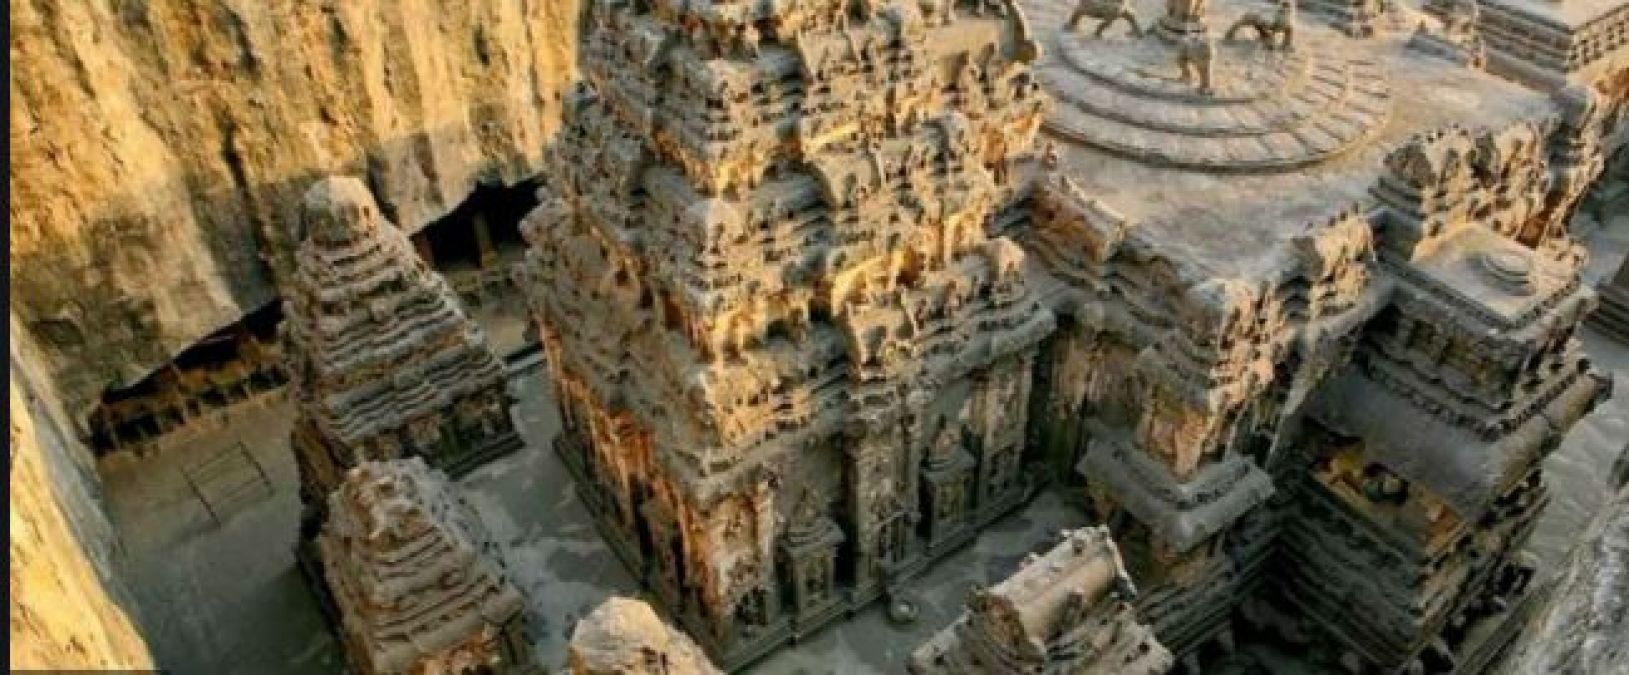 This temple was built by cutting stones weighing 40 thousand tons in 18 years